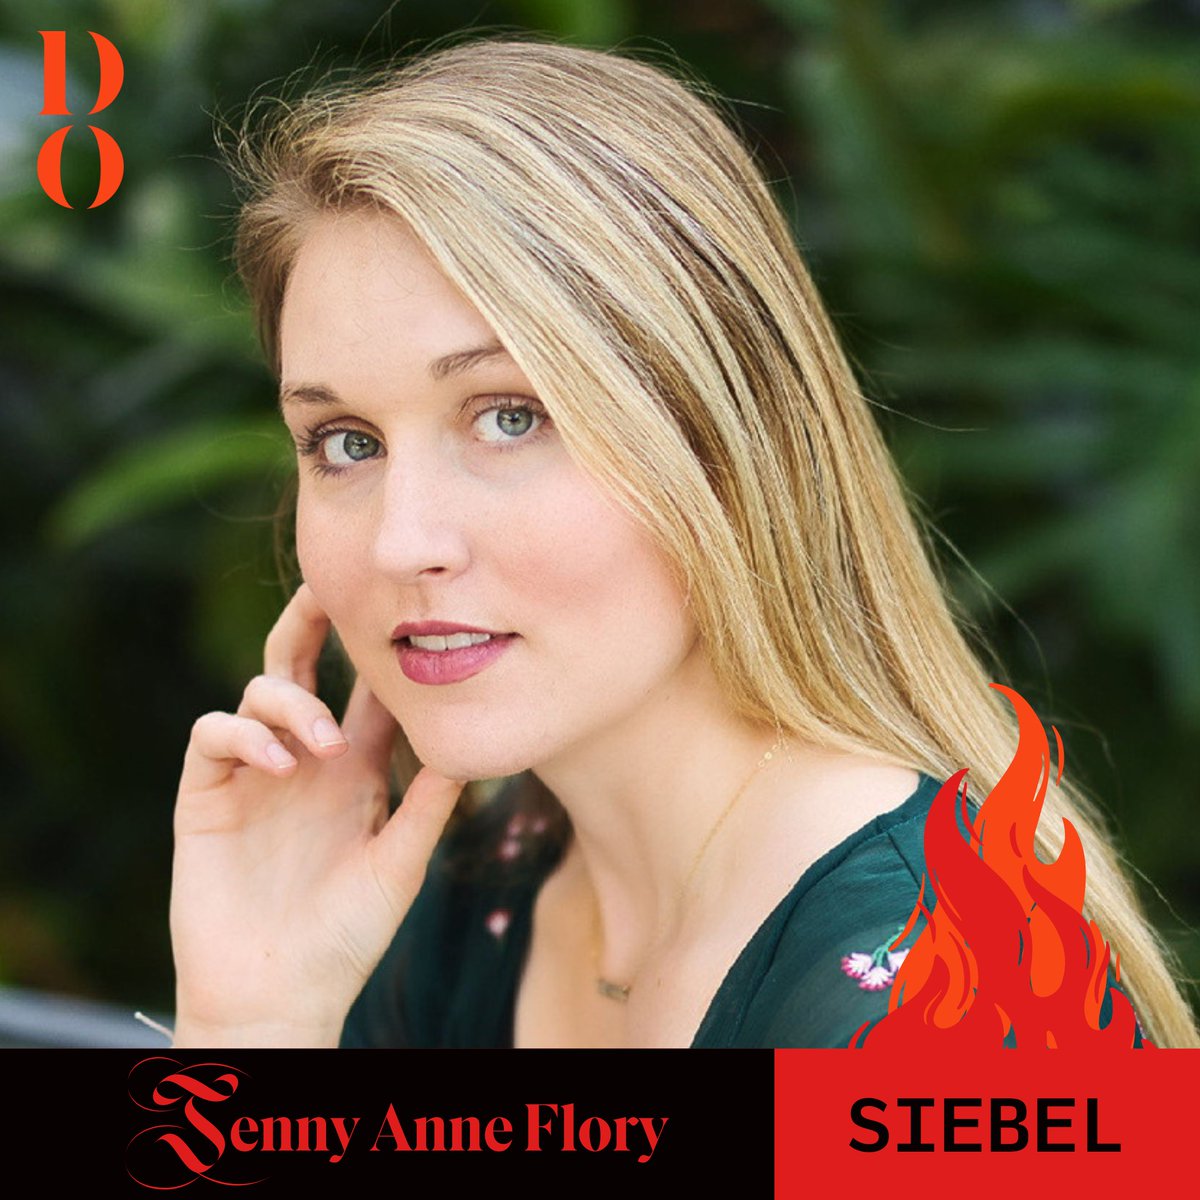 Siebel - performed by Mezzo-soprano Jenny Anne Flory - competes with Faust for Marguerite's attention, with only love (not a deal with the devil) to bring them together.

#faust #detroitopera #billionairesbehavingbadly #dealwiththedevil #allthatglittersisnotgold #thegounodcut https://t.co/wuS9gkOomI